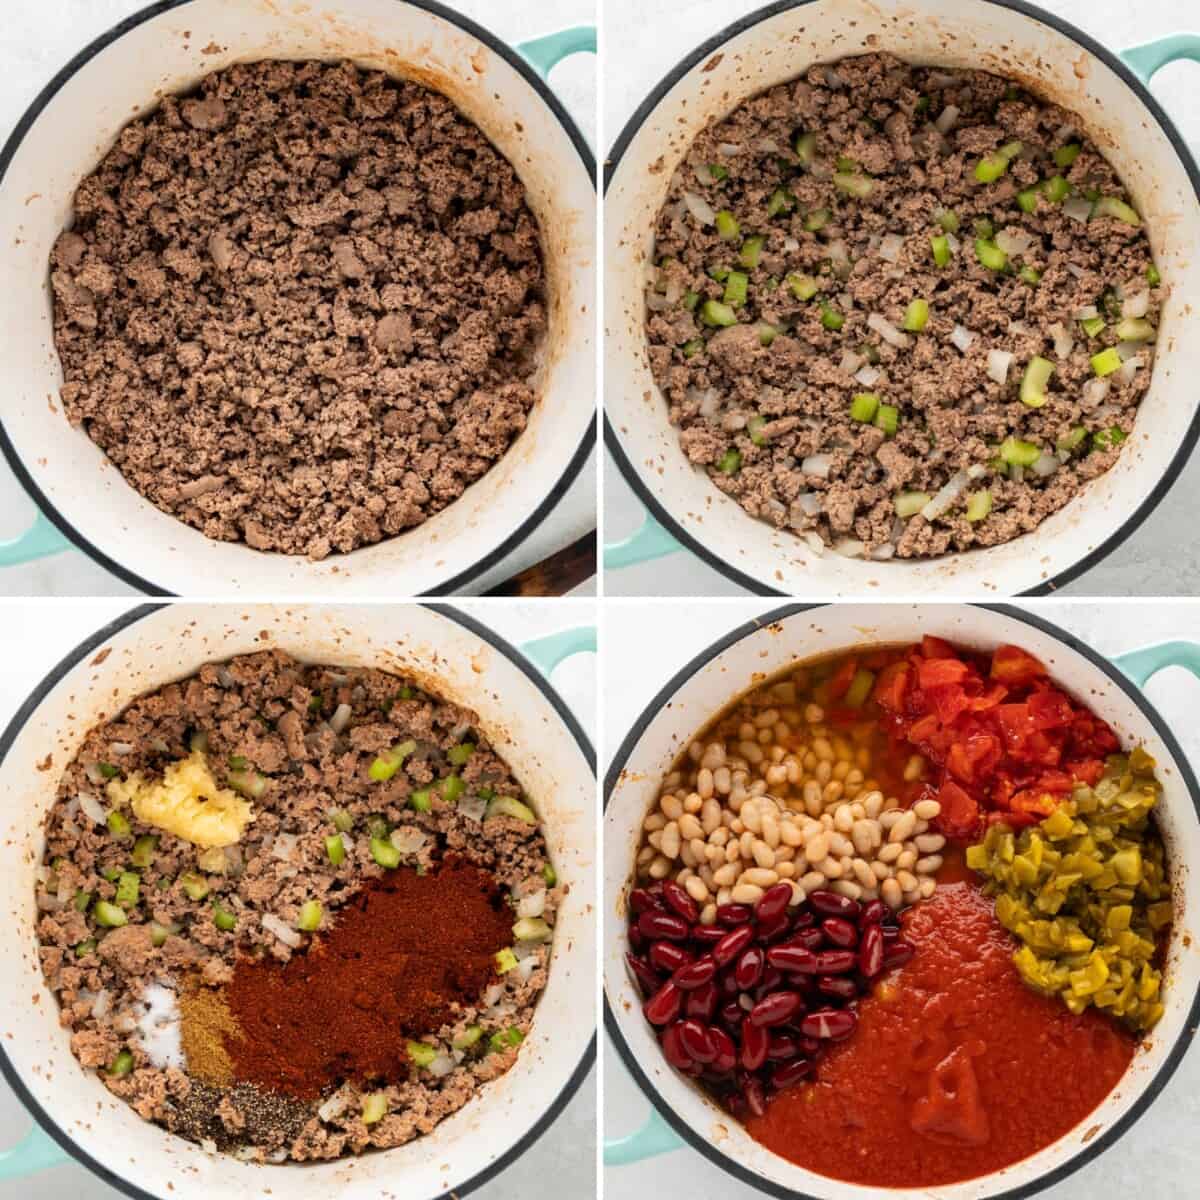 A collage of four images to show the process of how to make turkey chili from start to finish.